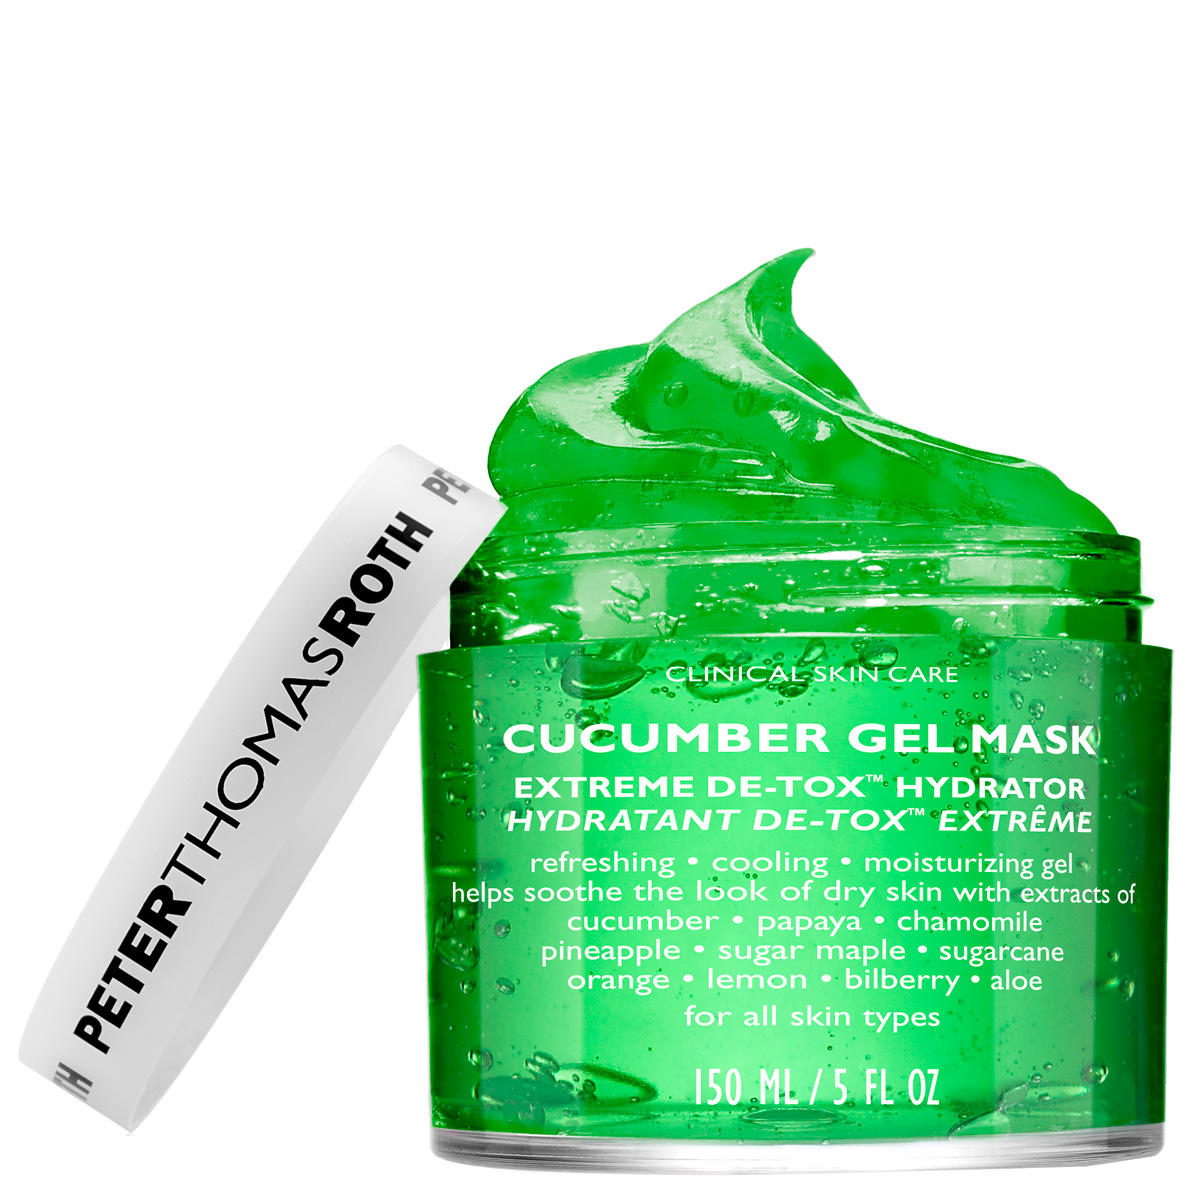 PETER THOMAS ROTH CLINICAL SKIN CARE Cucumber Gel Mask 150 ml - 1